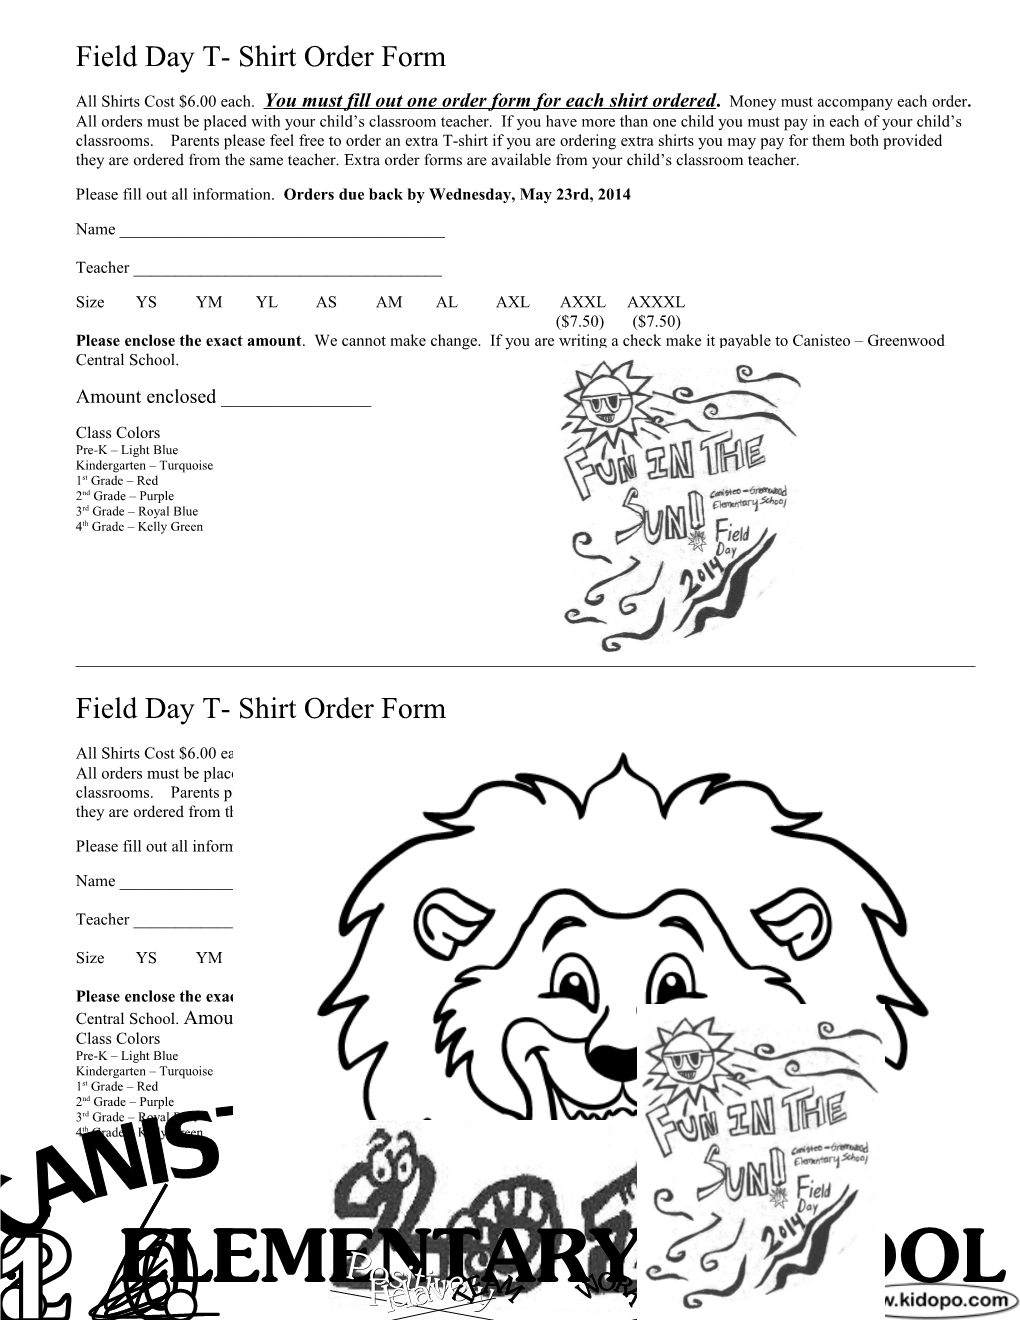 Field Day T- Shirt Order Form